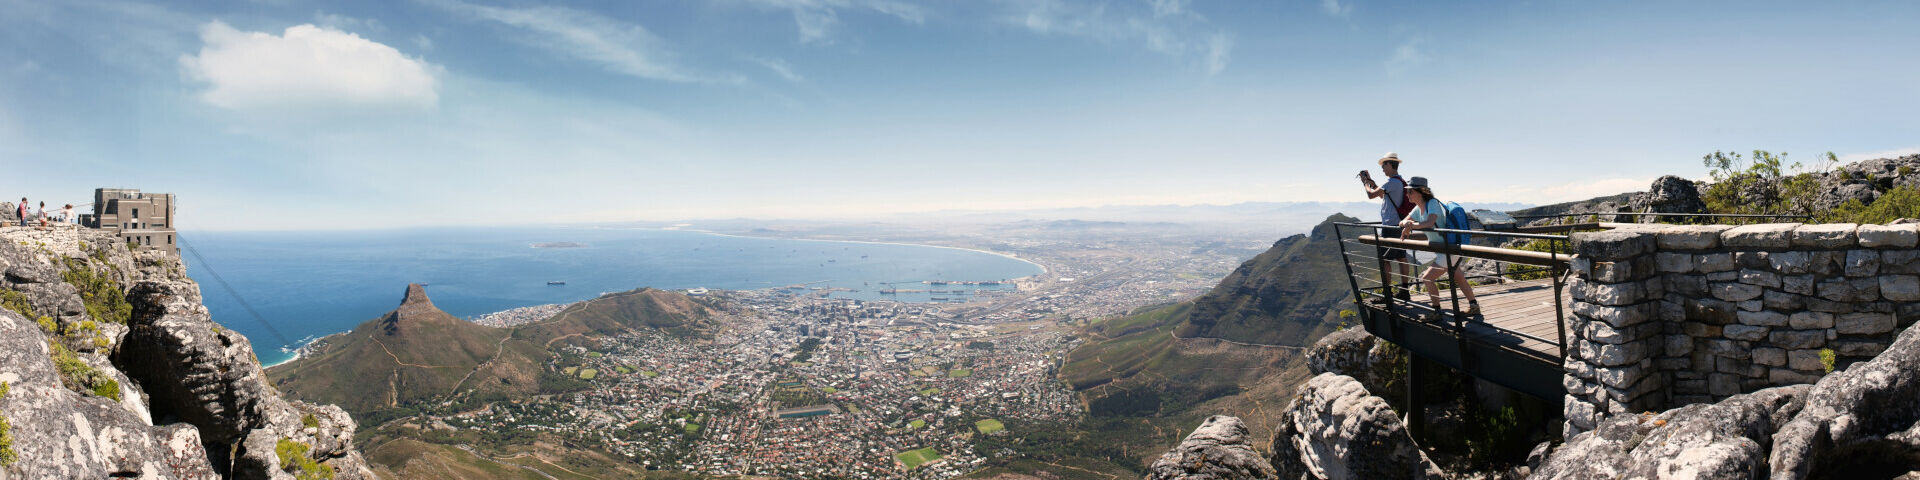 Panoramic view of the French couple enjoying the view of Cape Town from Table Mountain